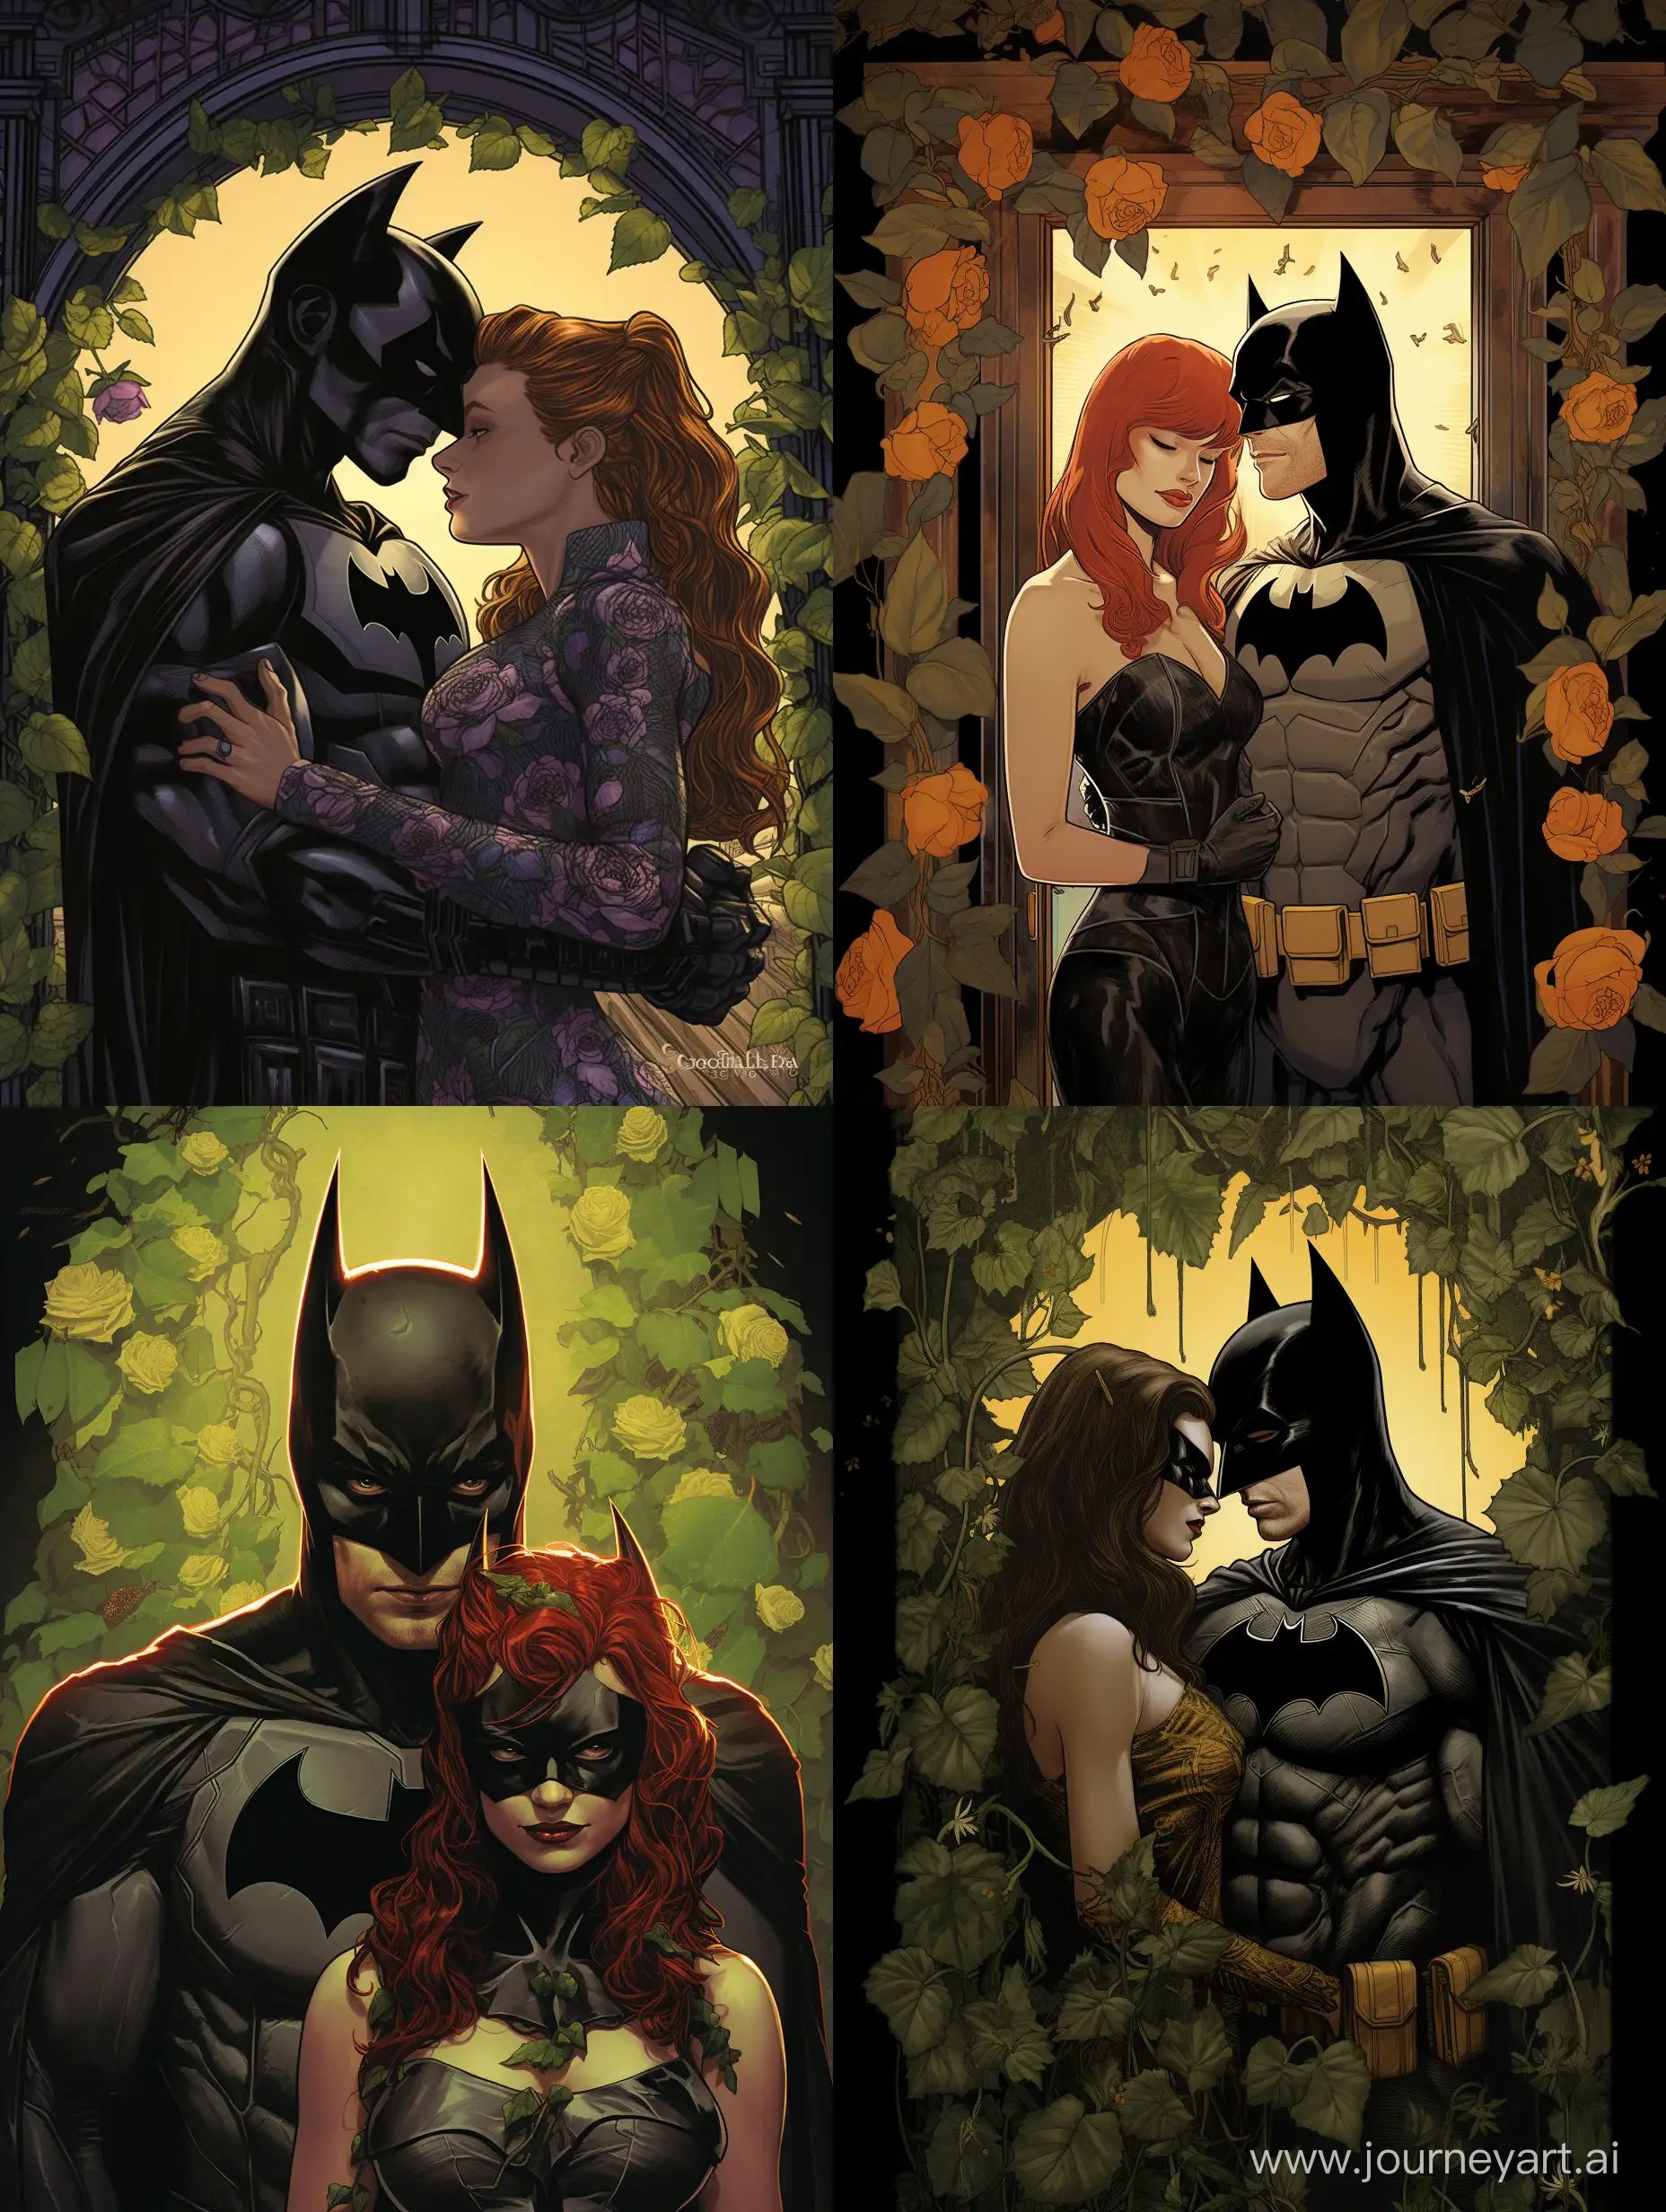 Four-frame comics, children's drawing style, Batman is locked in jail and his love, poison Ivy breaks him out. They get married and live happily ever after